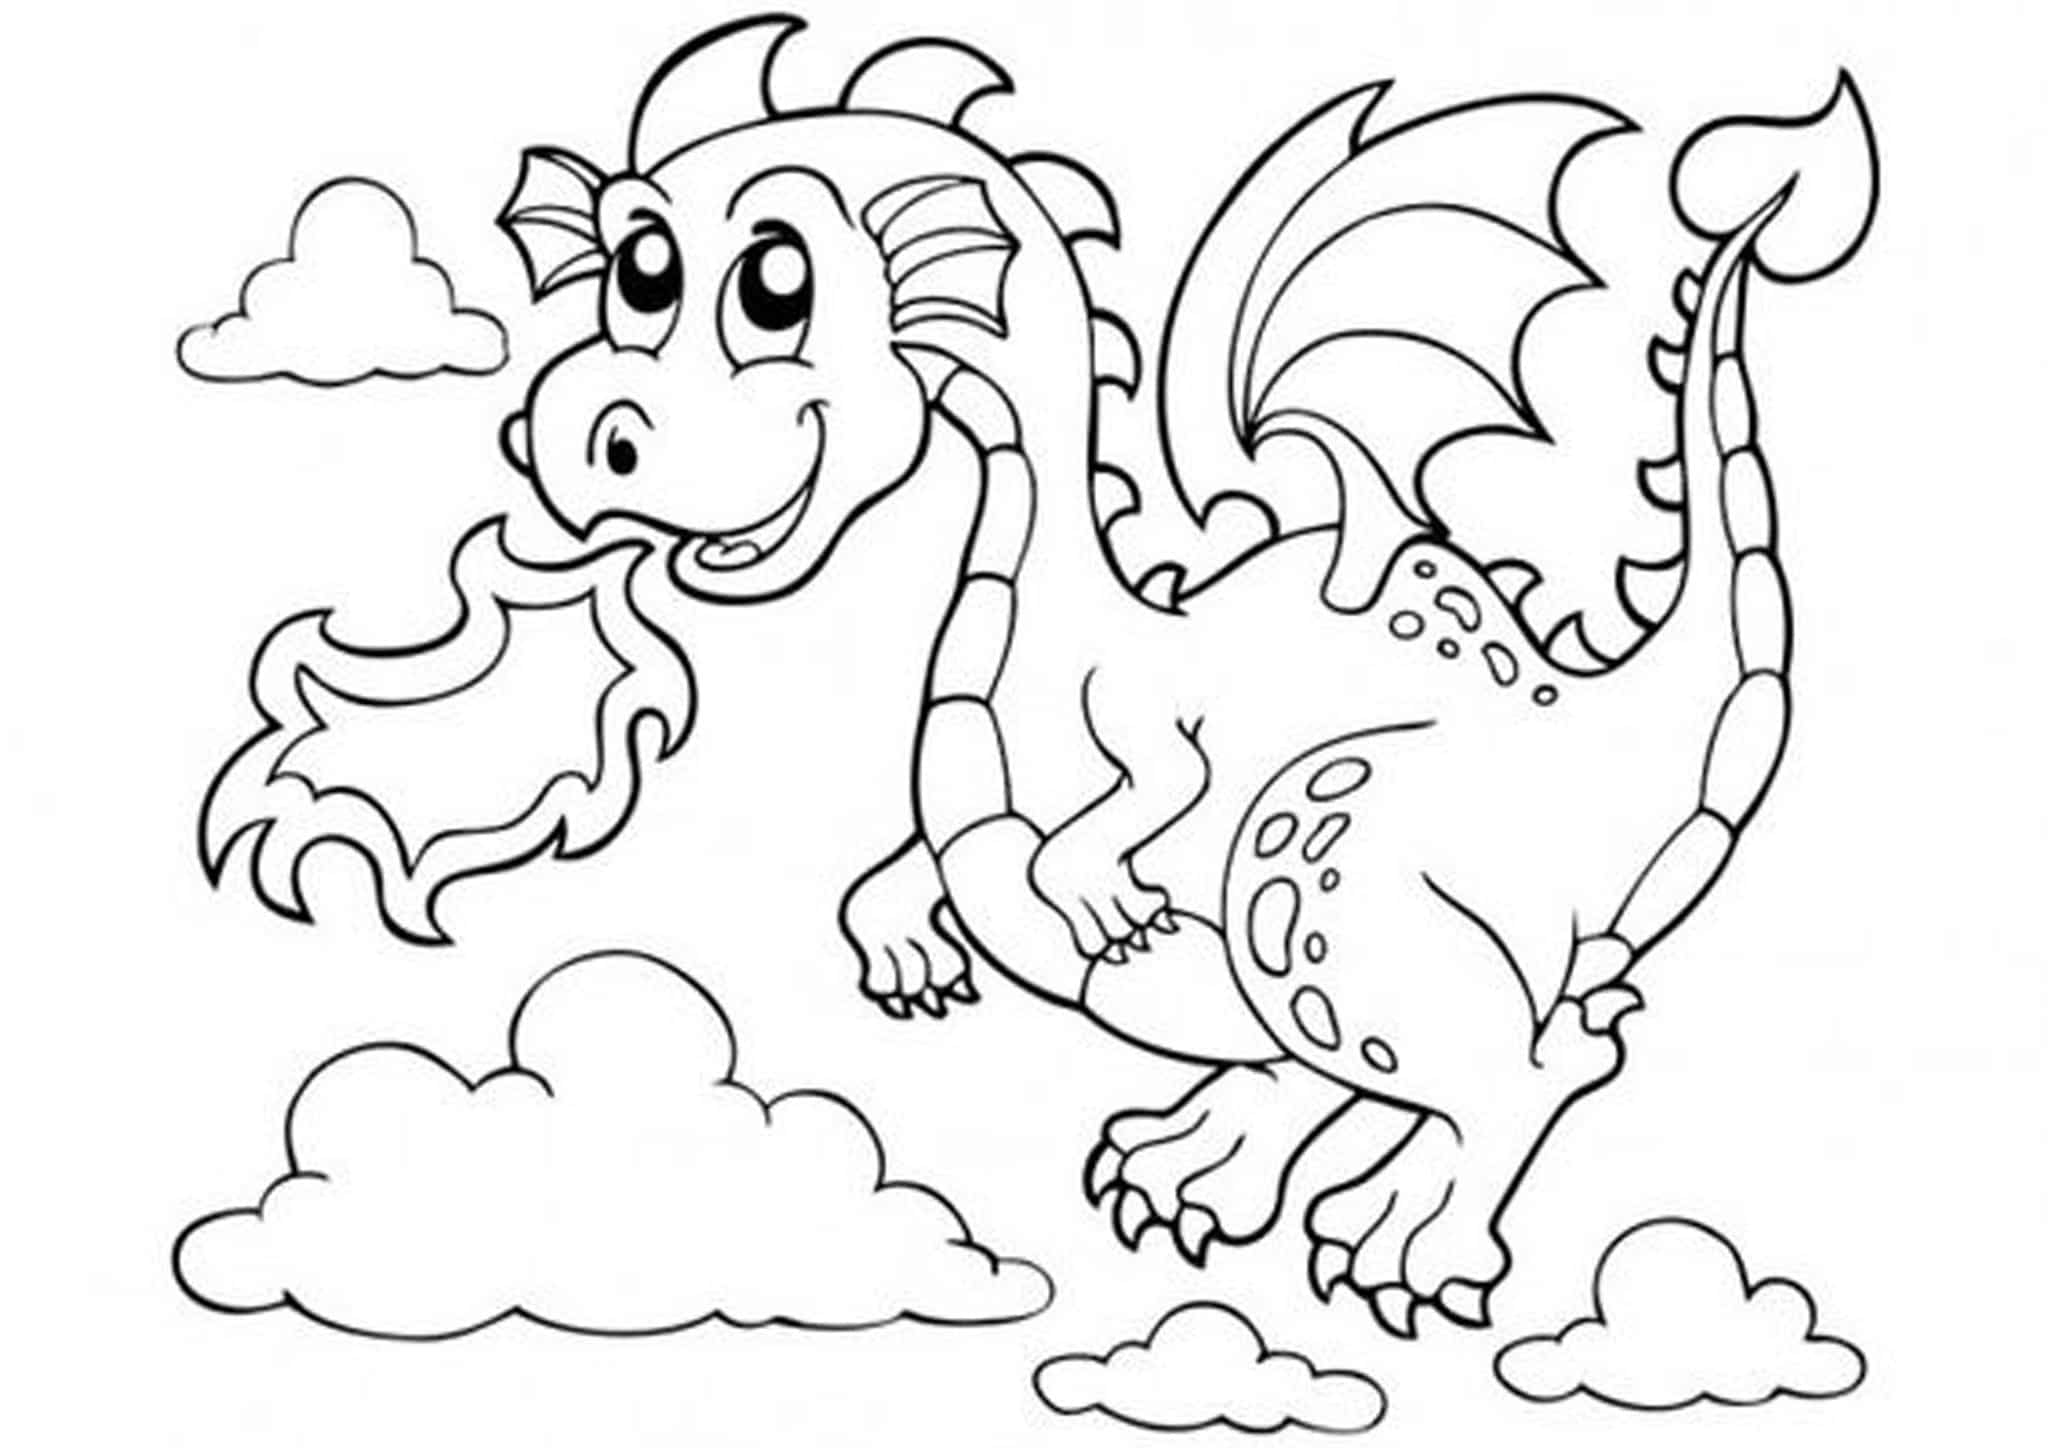 Download Free & Easy To Print Dragon Coloring Pages - Tulamama